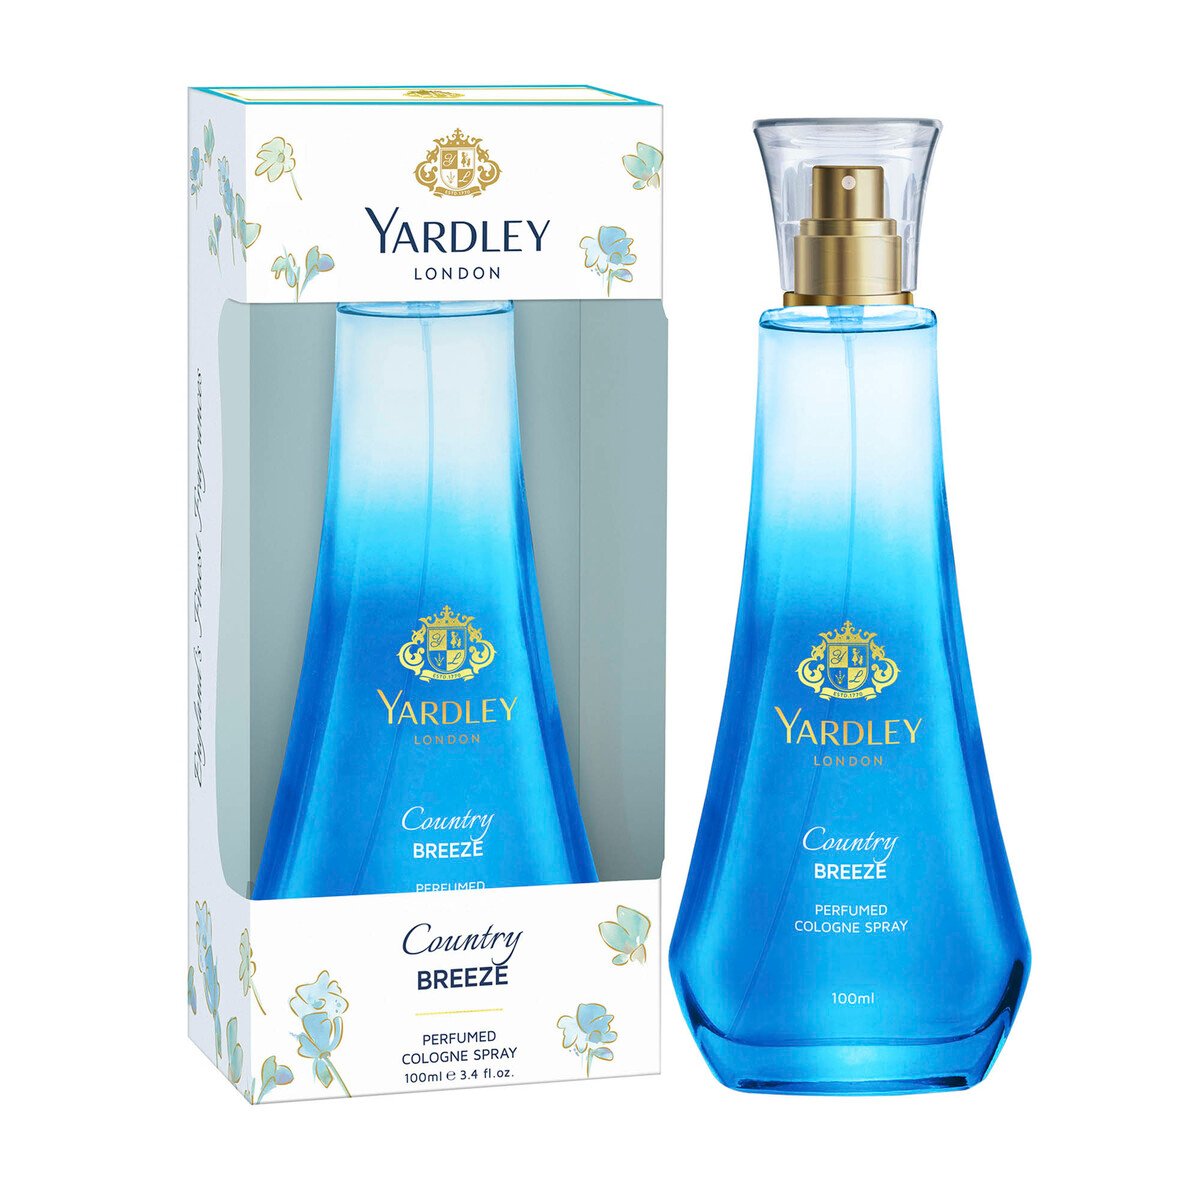 Yardley London Country Breeze Perfumed Cologne Spray 100 ml